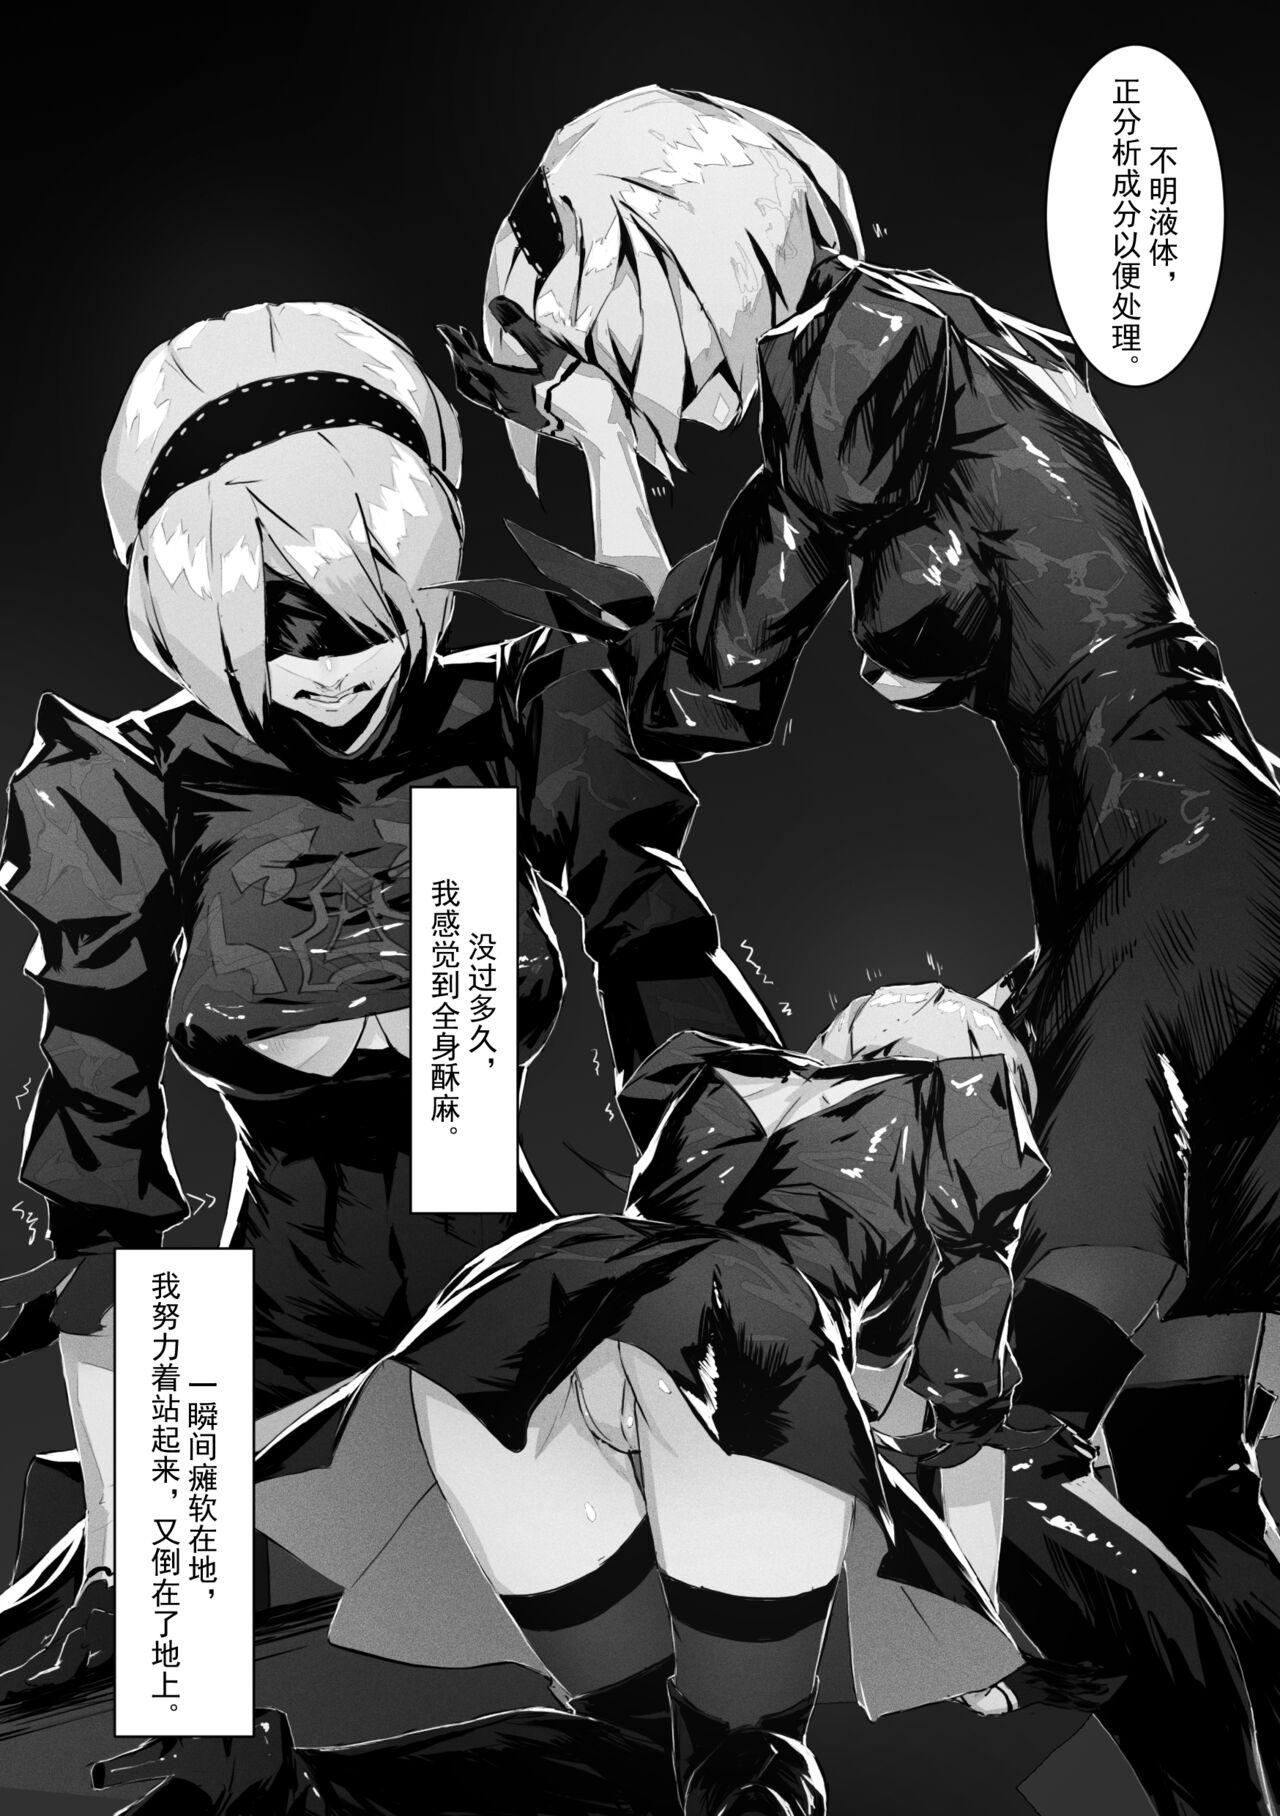  2B In Trouble Part 1-6 - Nier automata Real Amature Porn - Page 7